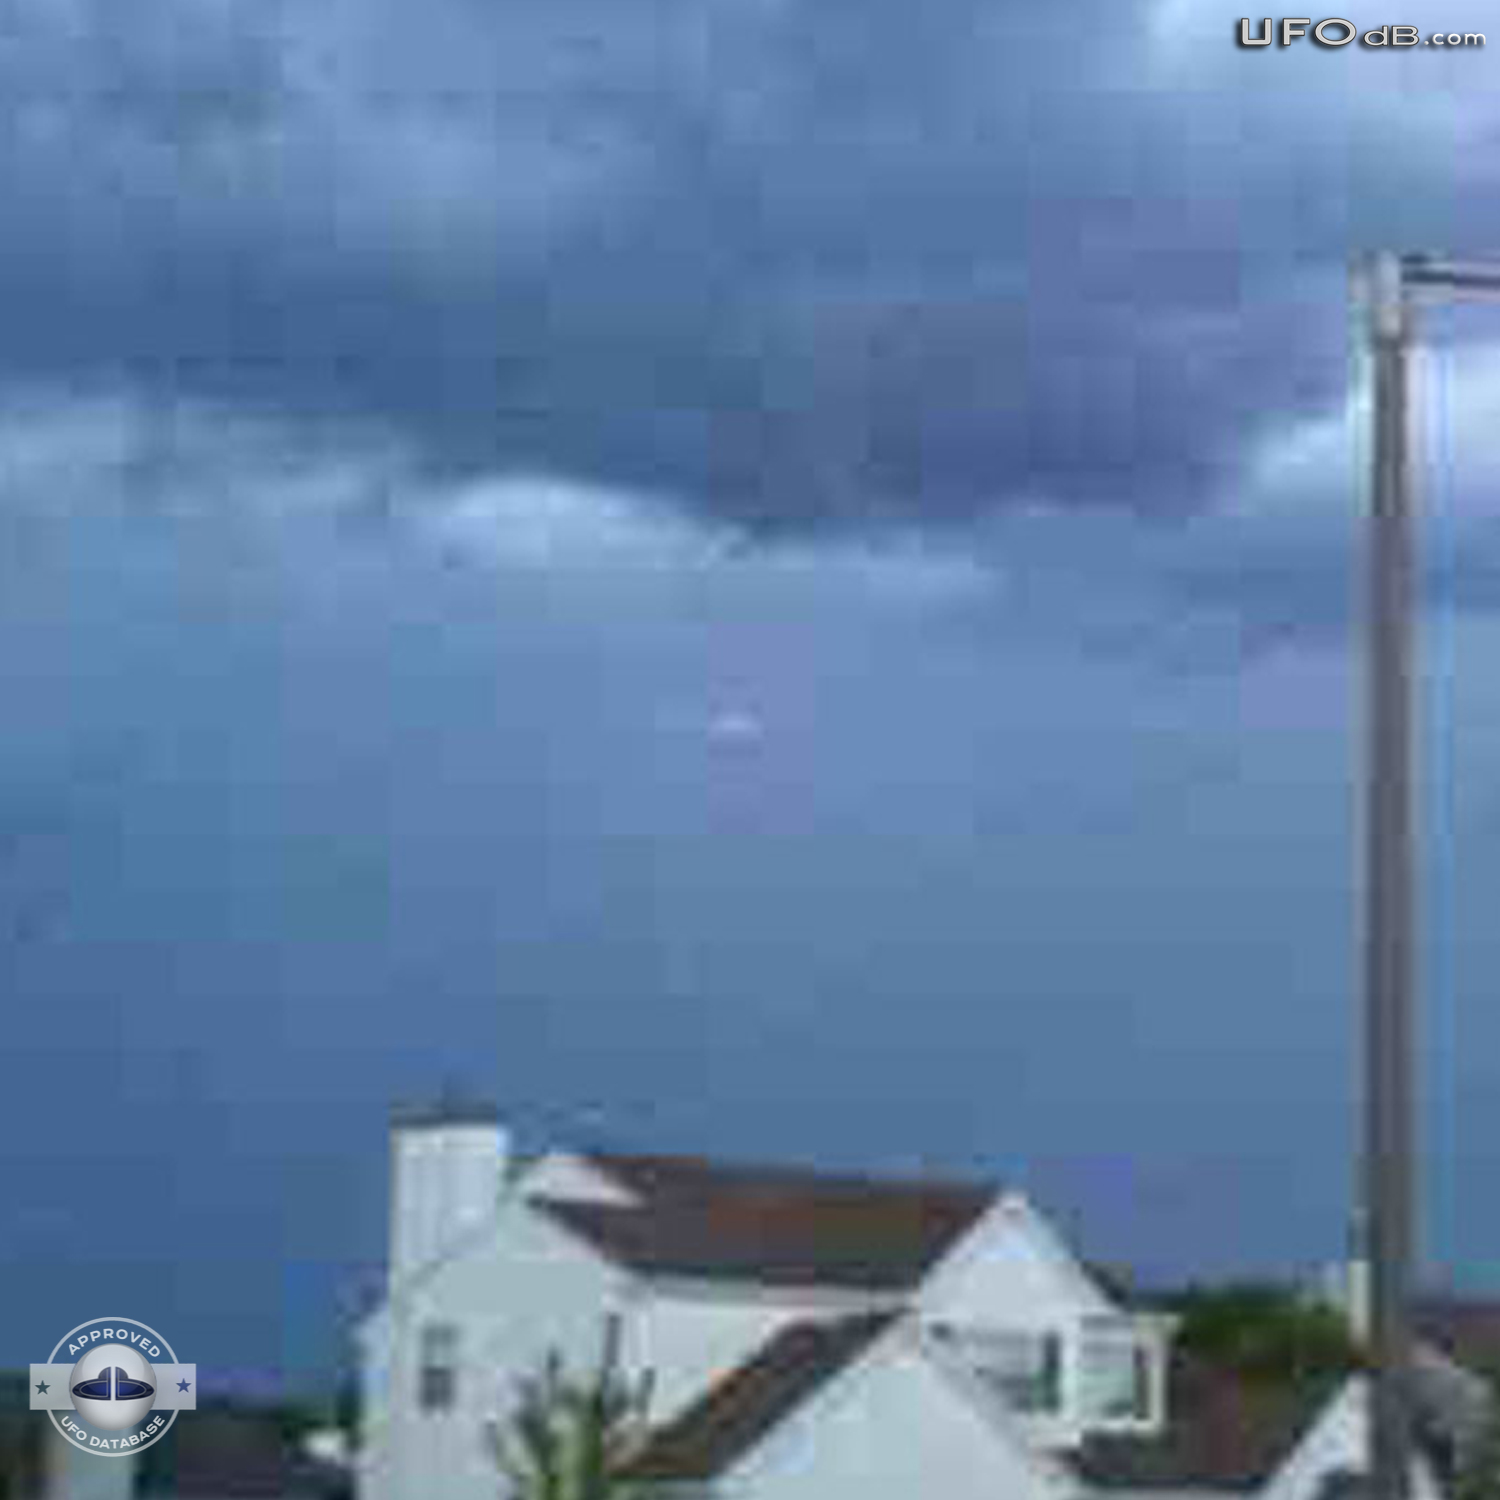 Zion Thunderstorm picture reveal a glowing UFO | USA | May 22 2011 UFO Picture #324-3